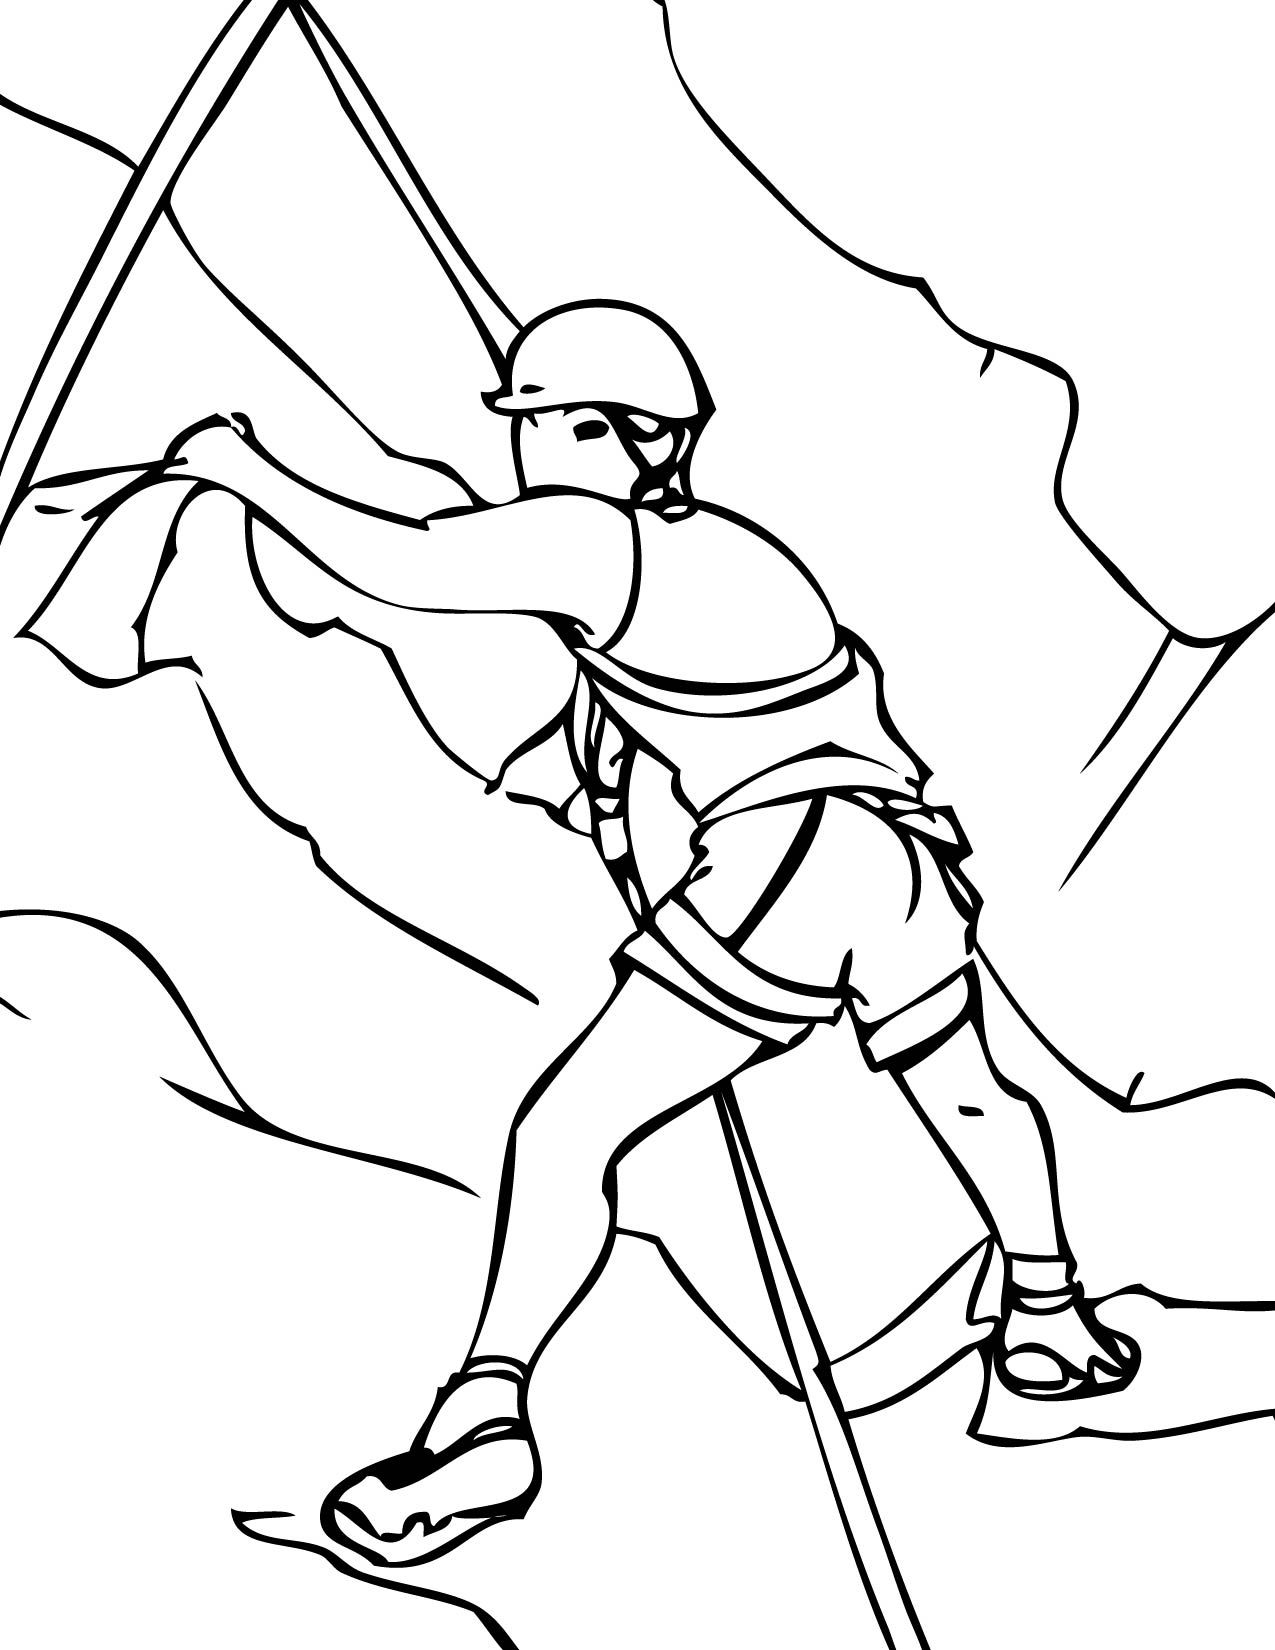 Rock Climbing- handipoints coloring page | Coloring pages, Sports coloring  pages, Coloring book pages